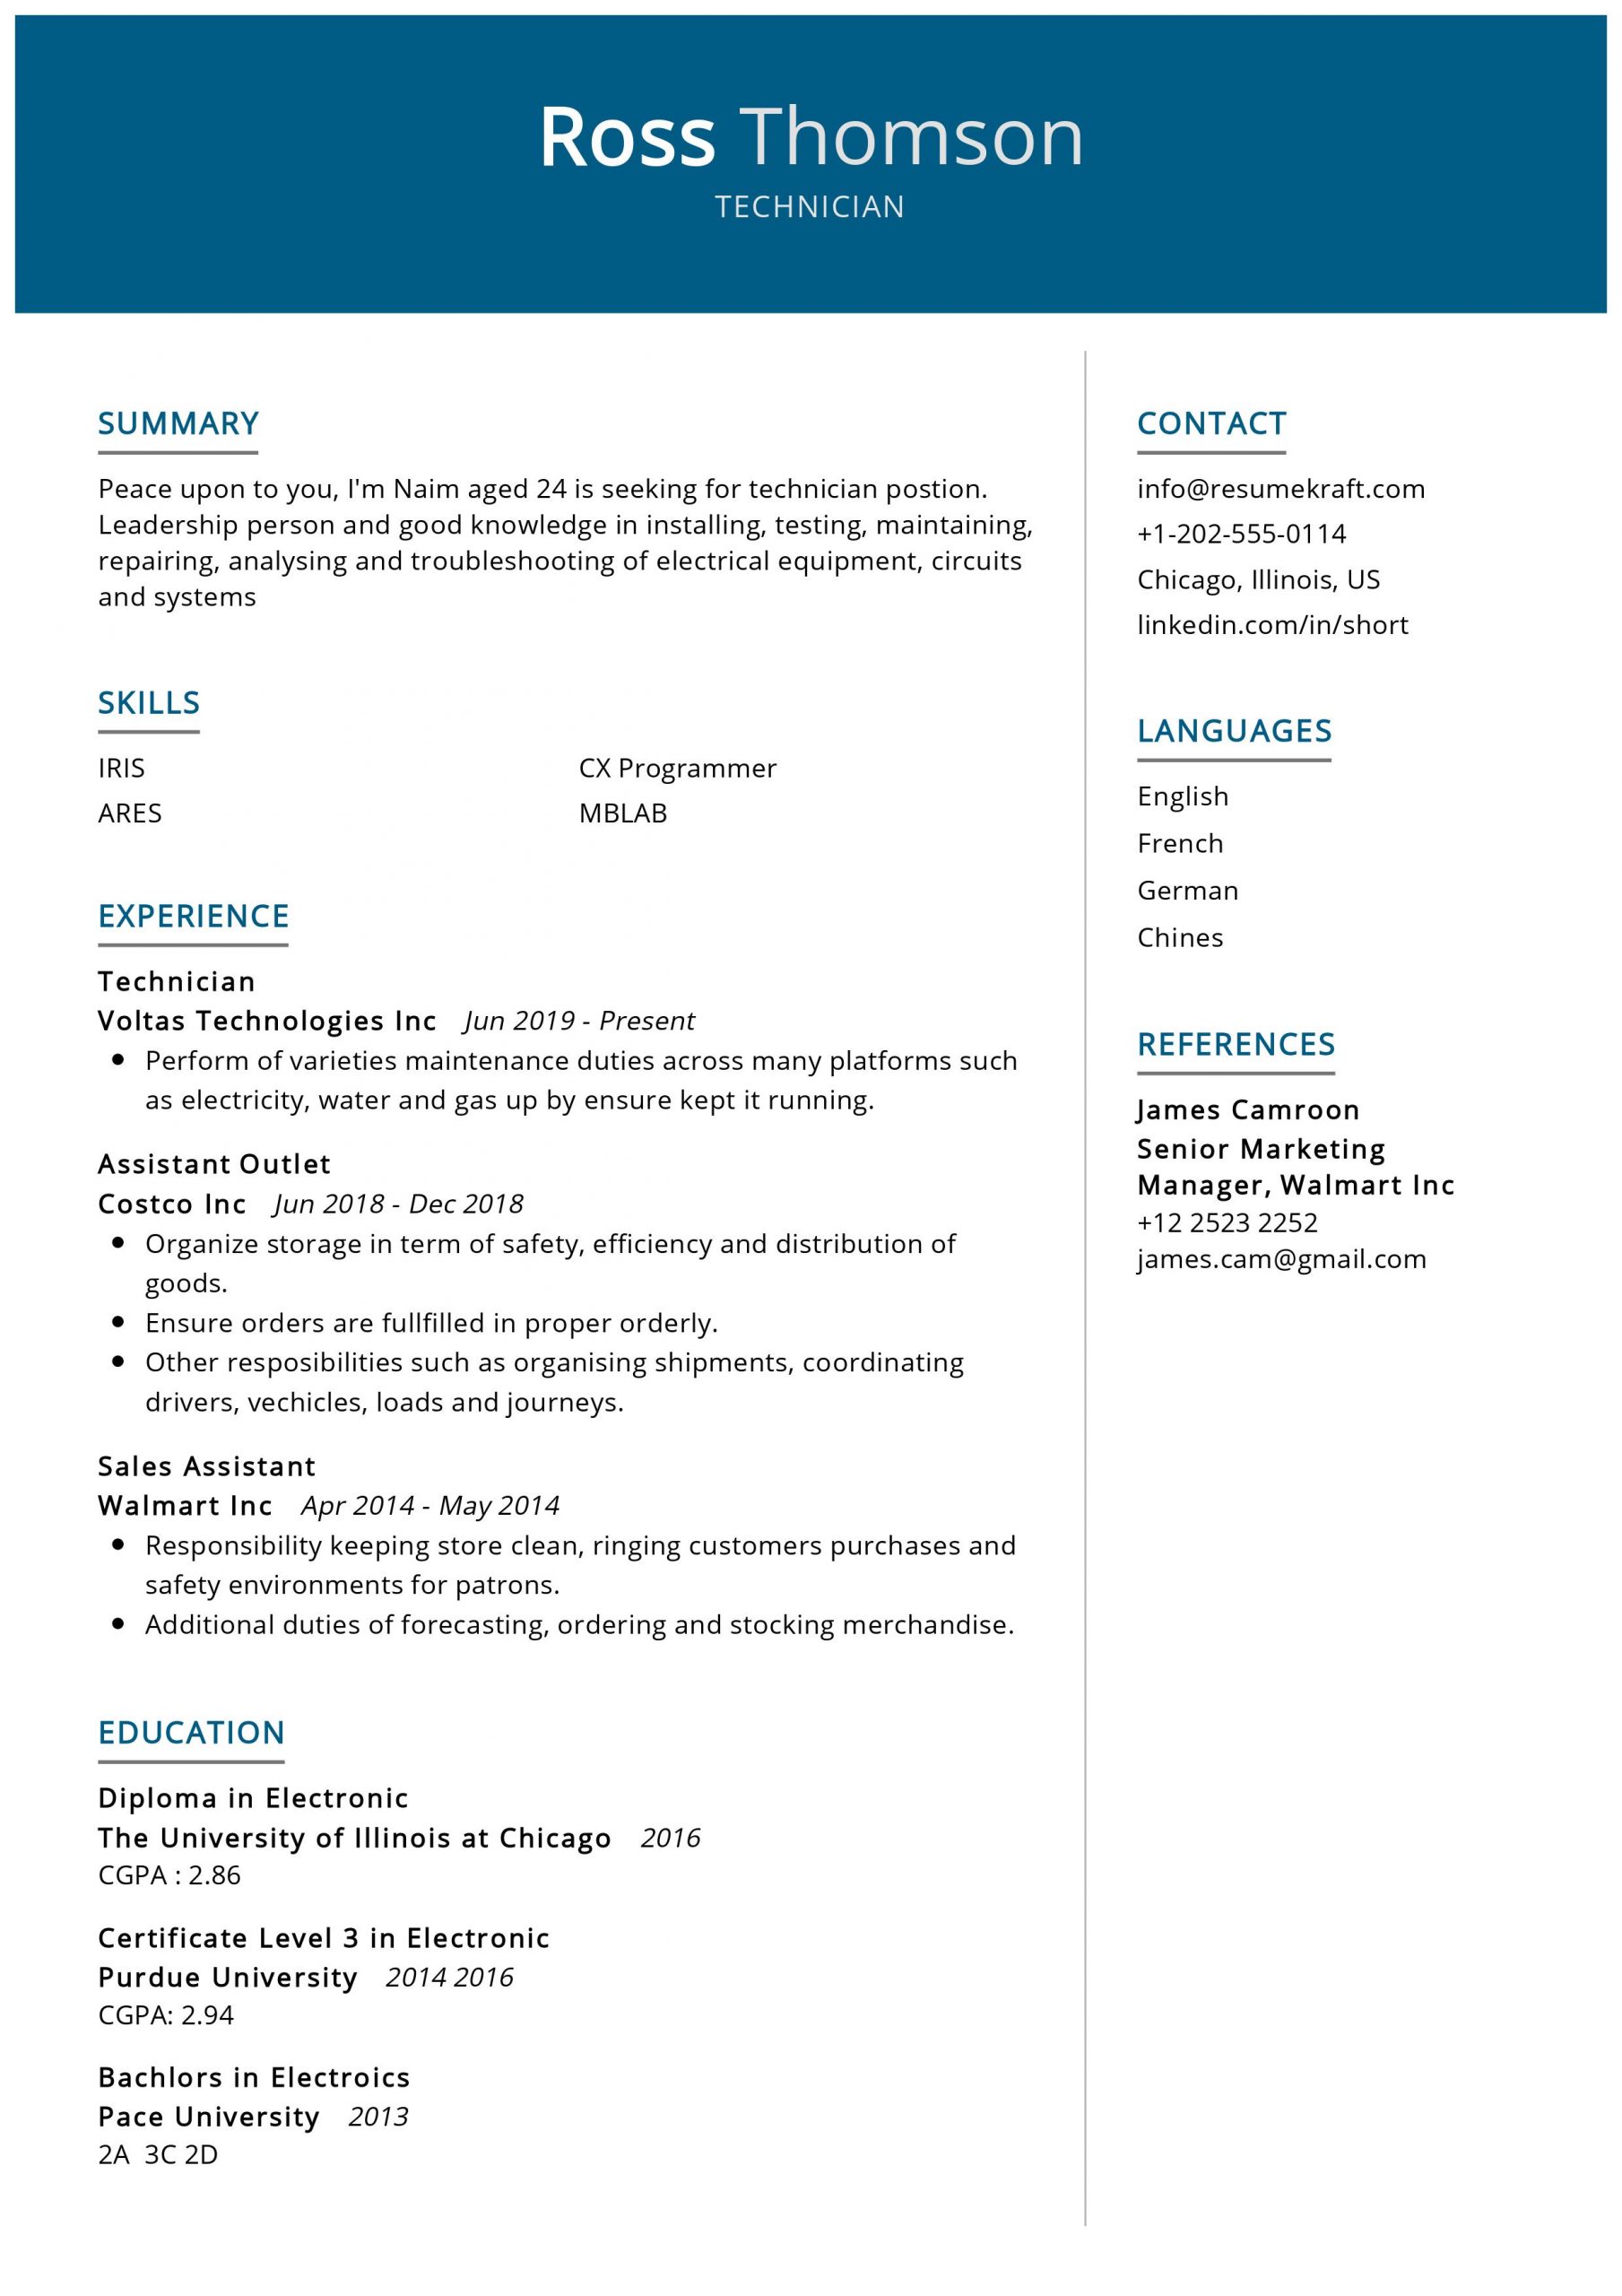 simple resume format for technician